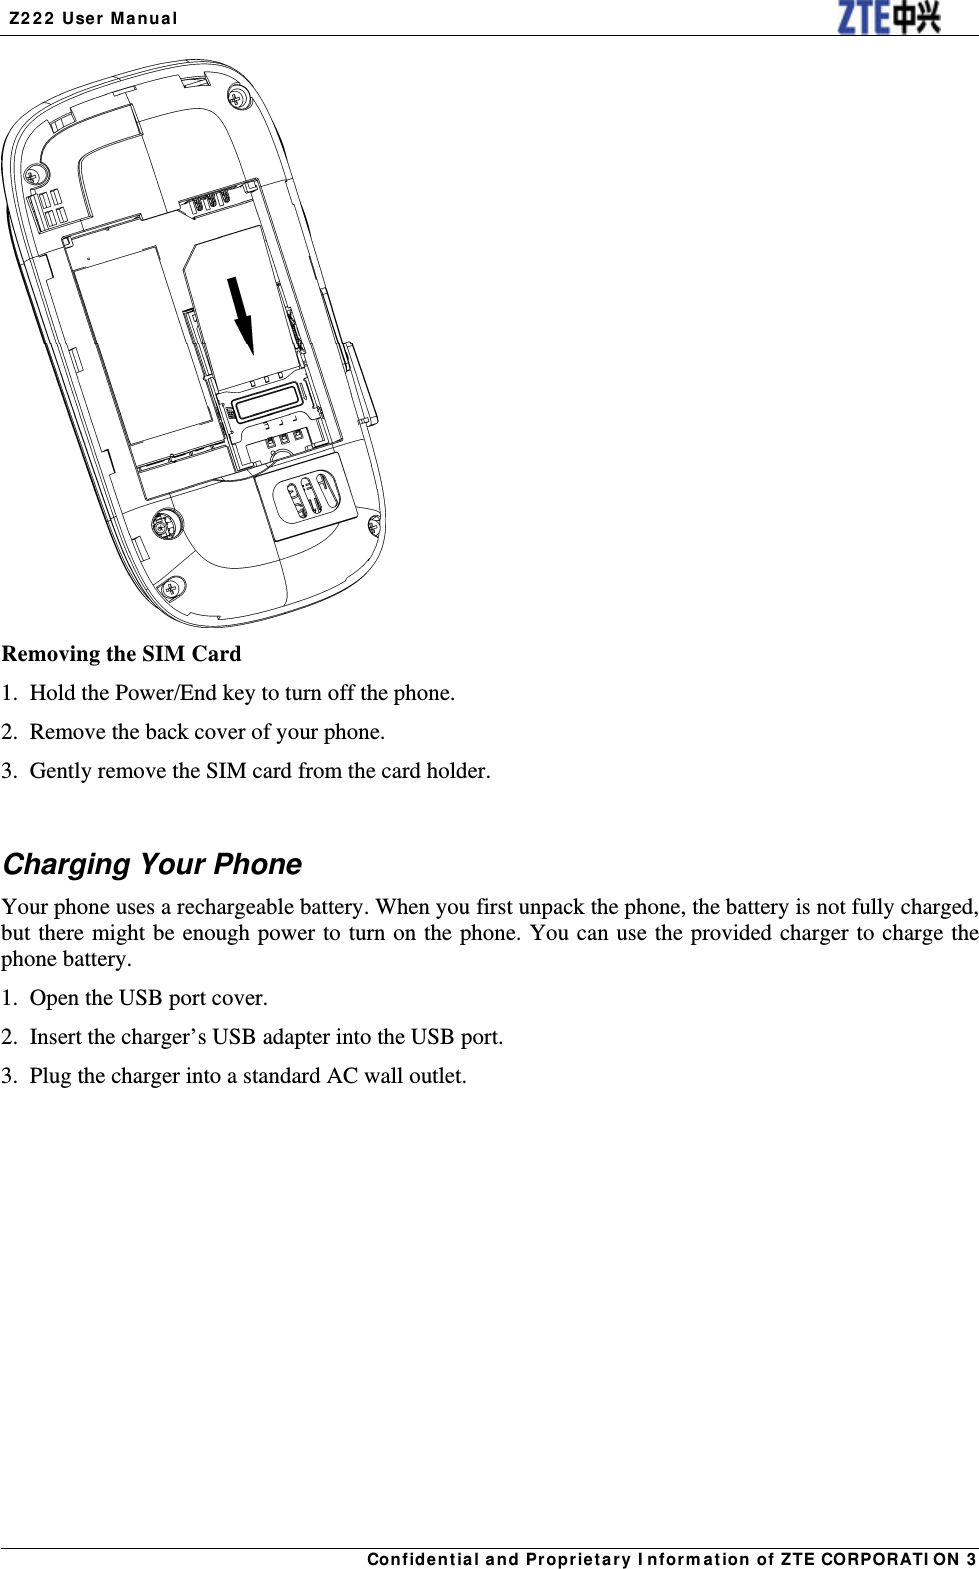  Z222 User Manual Confidential and Proprietary Information of ZTE CORPORATION 3 Removing the SIM Card 1.  Hold the Power/End key to turn off the phone. 2.  Remove the back cover of your phone. 3.  Gently remove the SIM card from the card holder.  Charging Your Phone Your phone uses a rechargeable battery. When you first unpack the phone, the battery is not fully charged, but there might be enough power to turn on the phone. You can use the provided charger to charge the phone battery. 1.  Open the USB port cover. 2.  Insert the charger’s USB adapter into the USB port. 3.  Plug the charger into a standard AC wall outlet. 